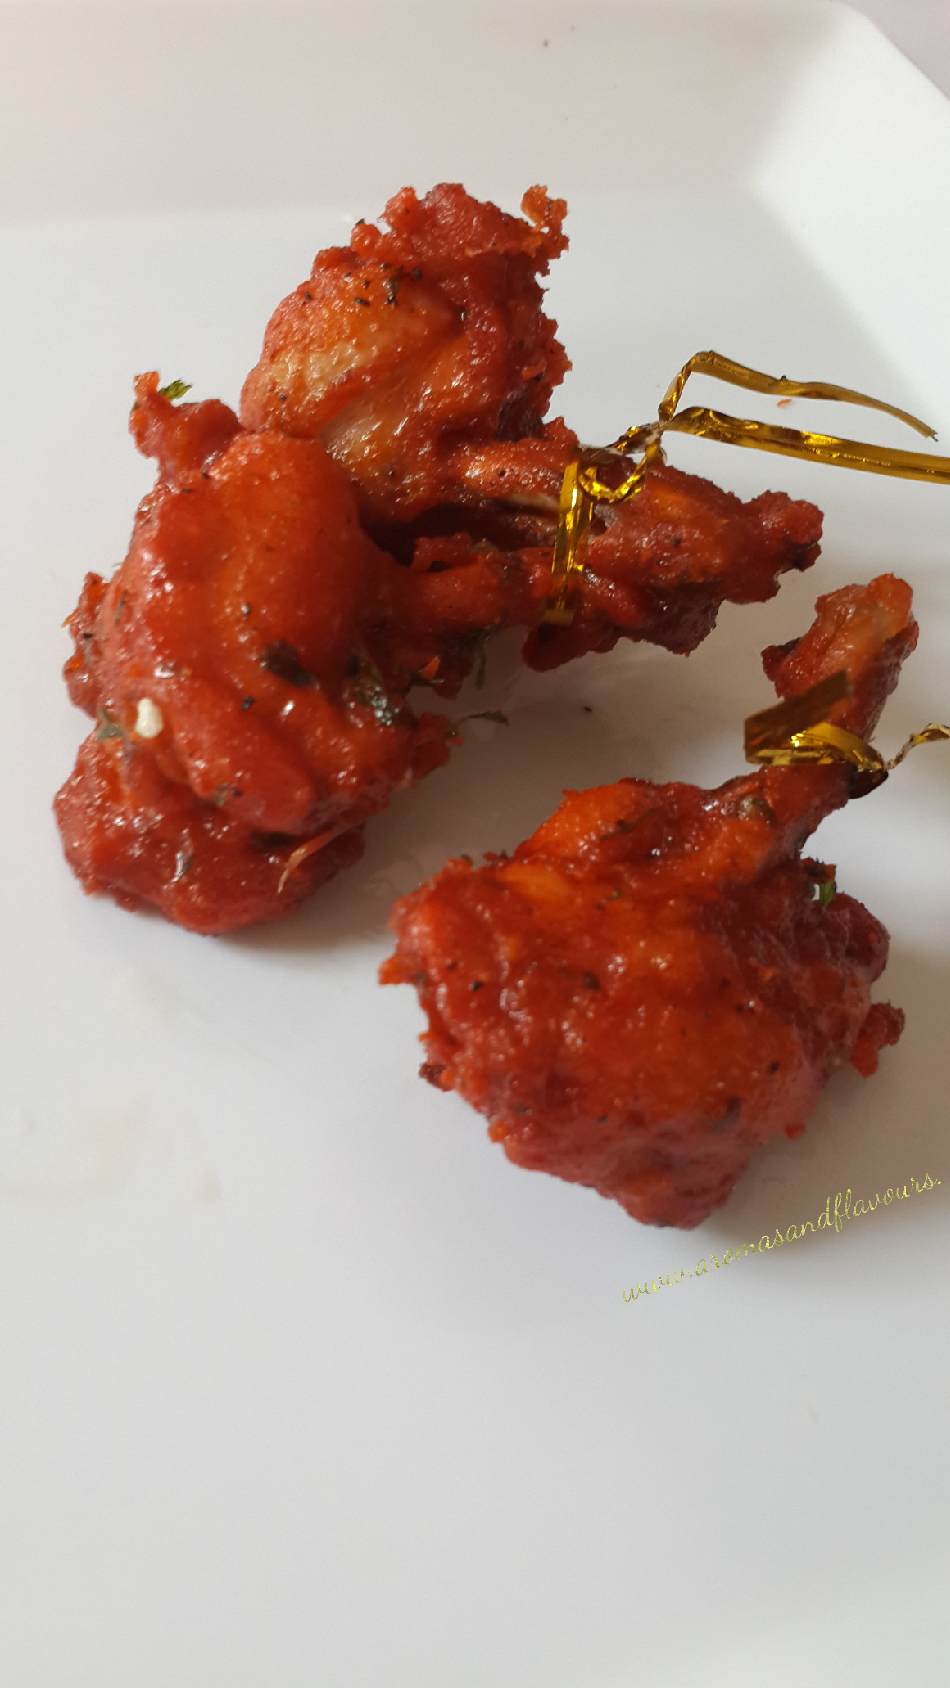 Tender delicious chicken lollipops for you and your kids